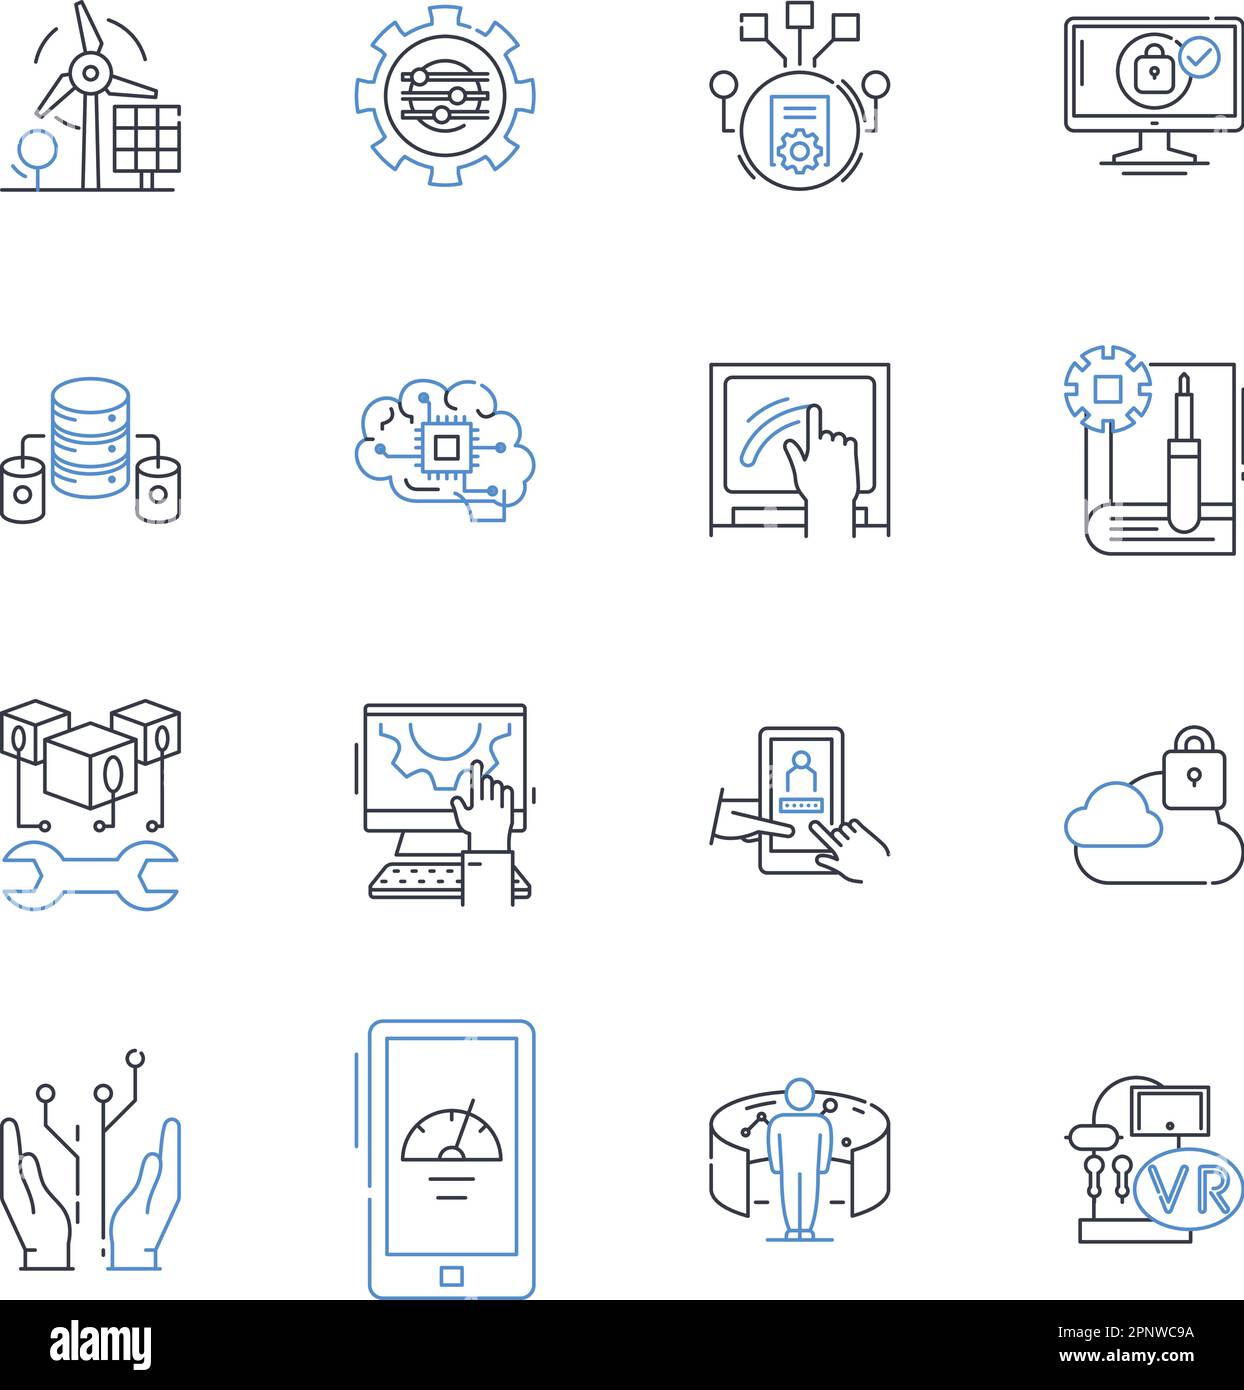 Software engineering line icons collection. Code, Algorithms, Debugging, Programming, Optimization, Integration, Testing vector and linear Stock Vector